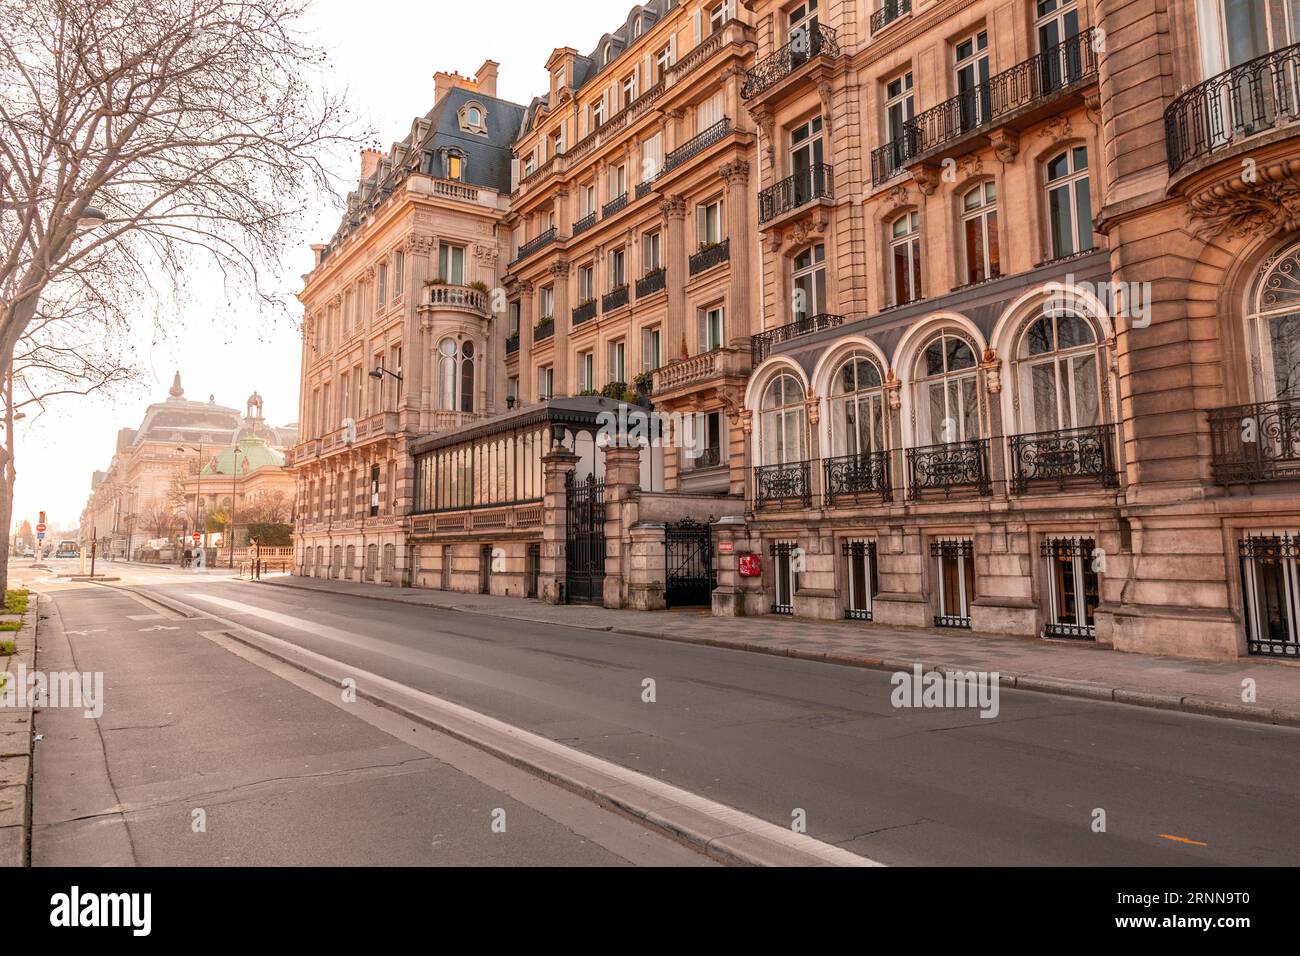 Paris, France - January 24, 2022: General street view from Paris, the French capital. Typical French architecture and urban view. Stock Photo